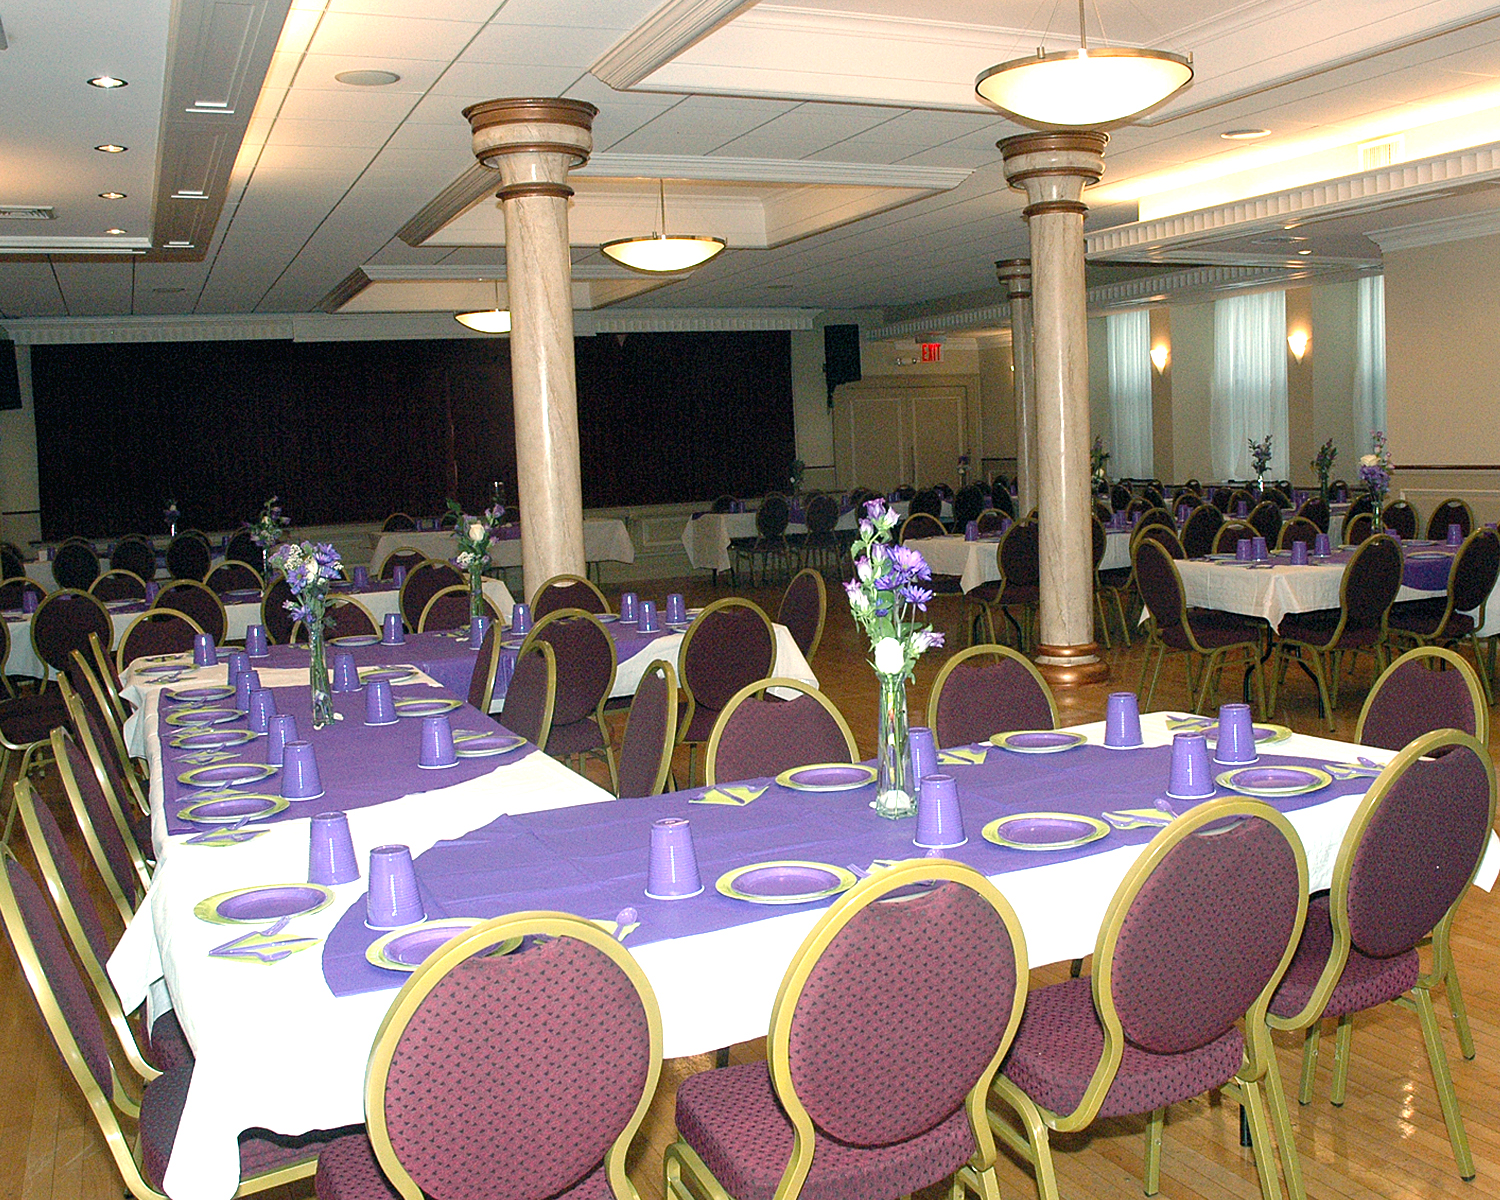 The catering hall ready for the celebration